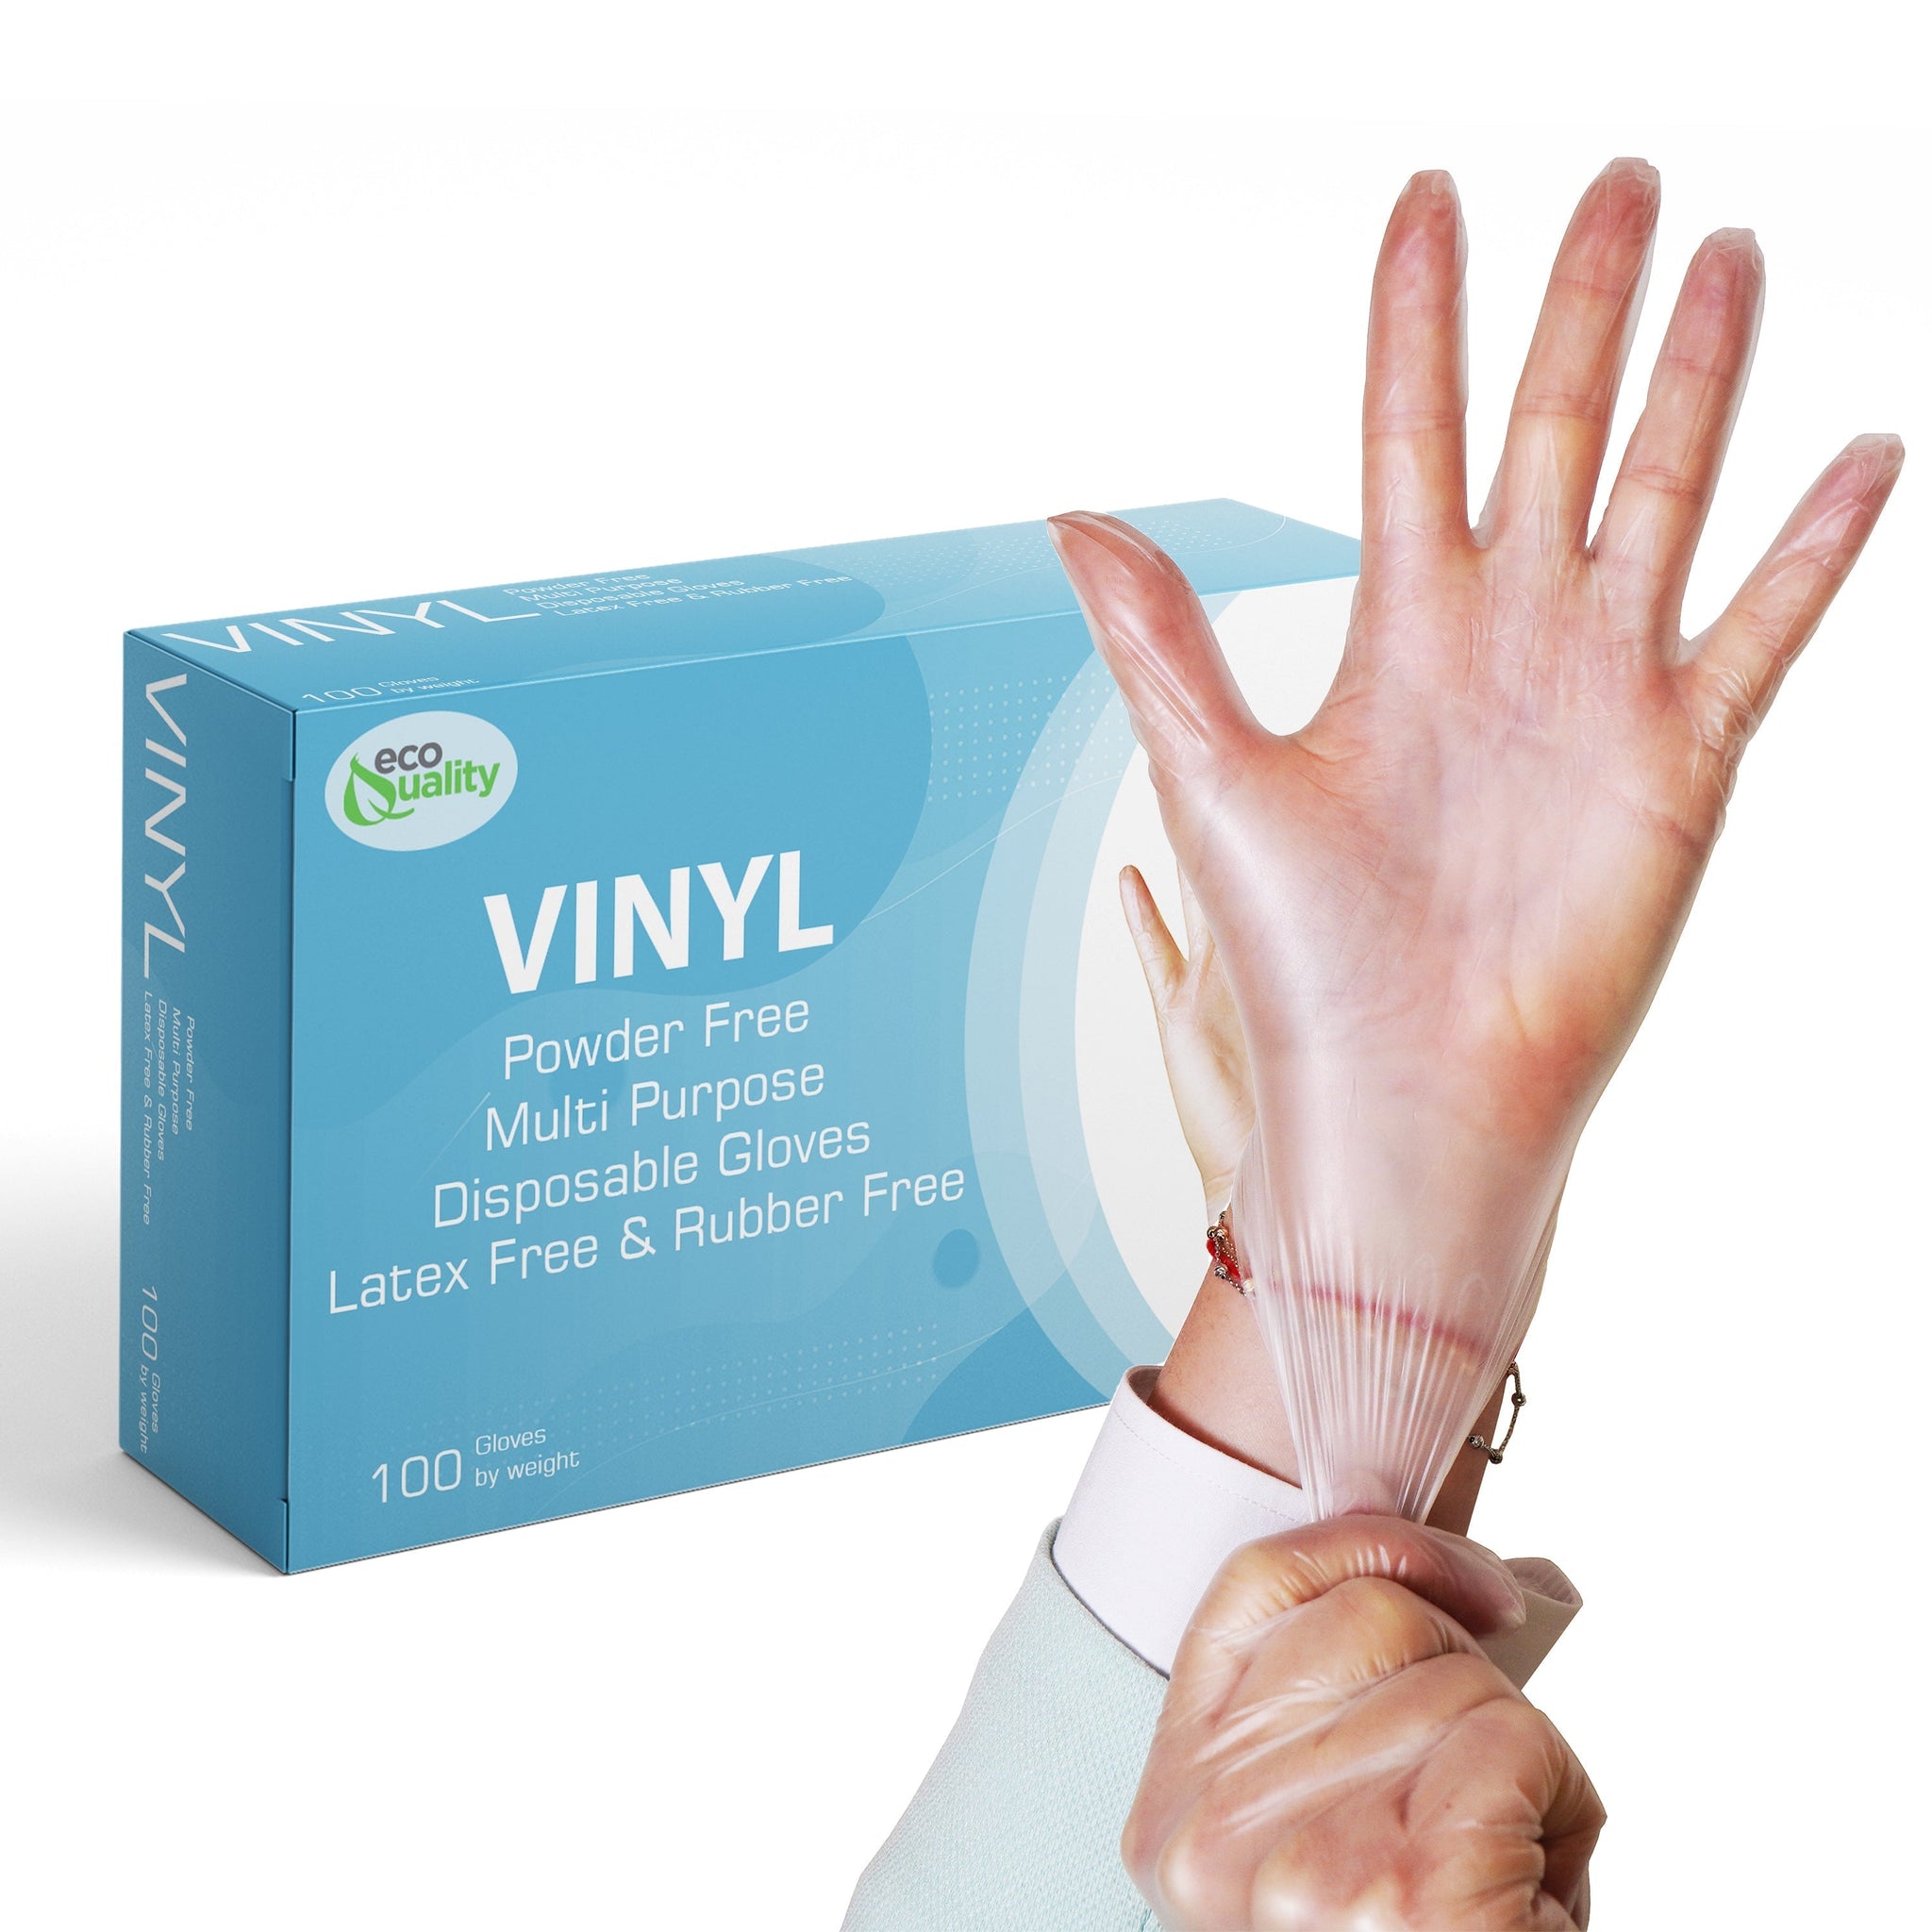 Cleaning Cooking Janitorial Gardening Multipurpose  Small  Vinyl Powder Latex Free Gloves  Restaurant Supplies  Plastic Gloves  latex gloves  Gloves  Food service  disposable gloves  Covid Supplies  Covid x Large